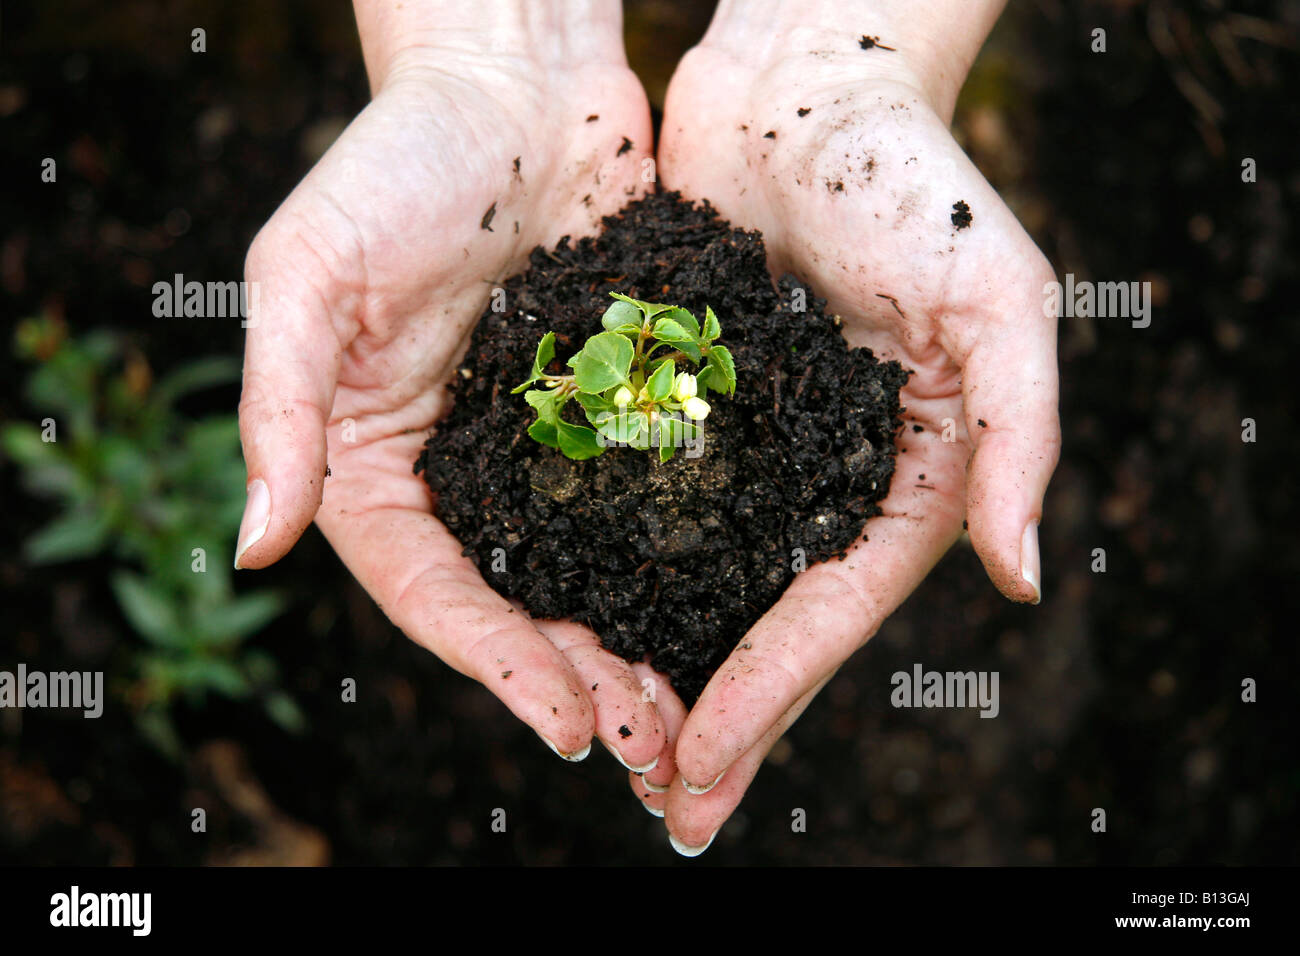 Hand holding peat moss organic matter improve soil for agriculture organic  plant growing, ecology concept Stock Photo - Alamy